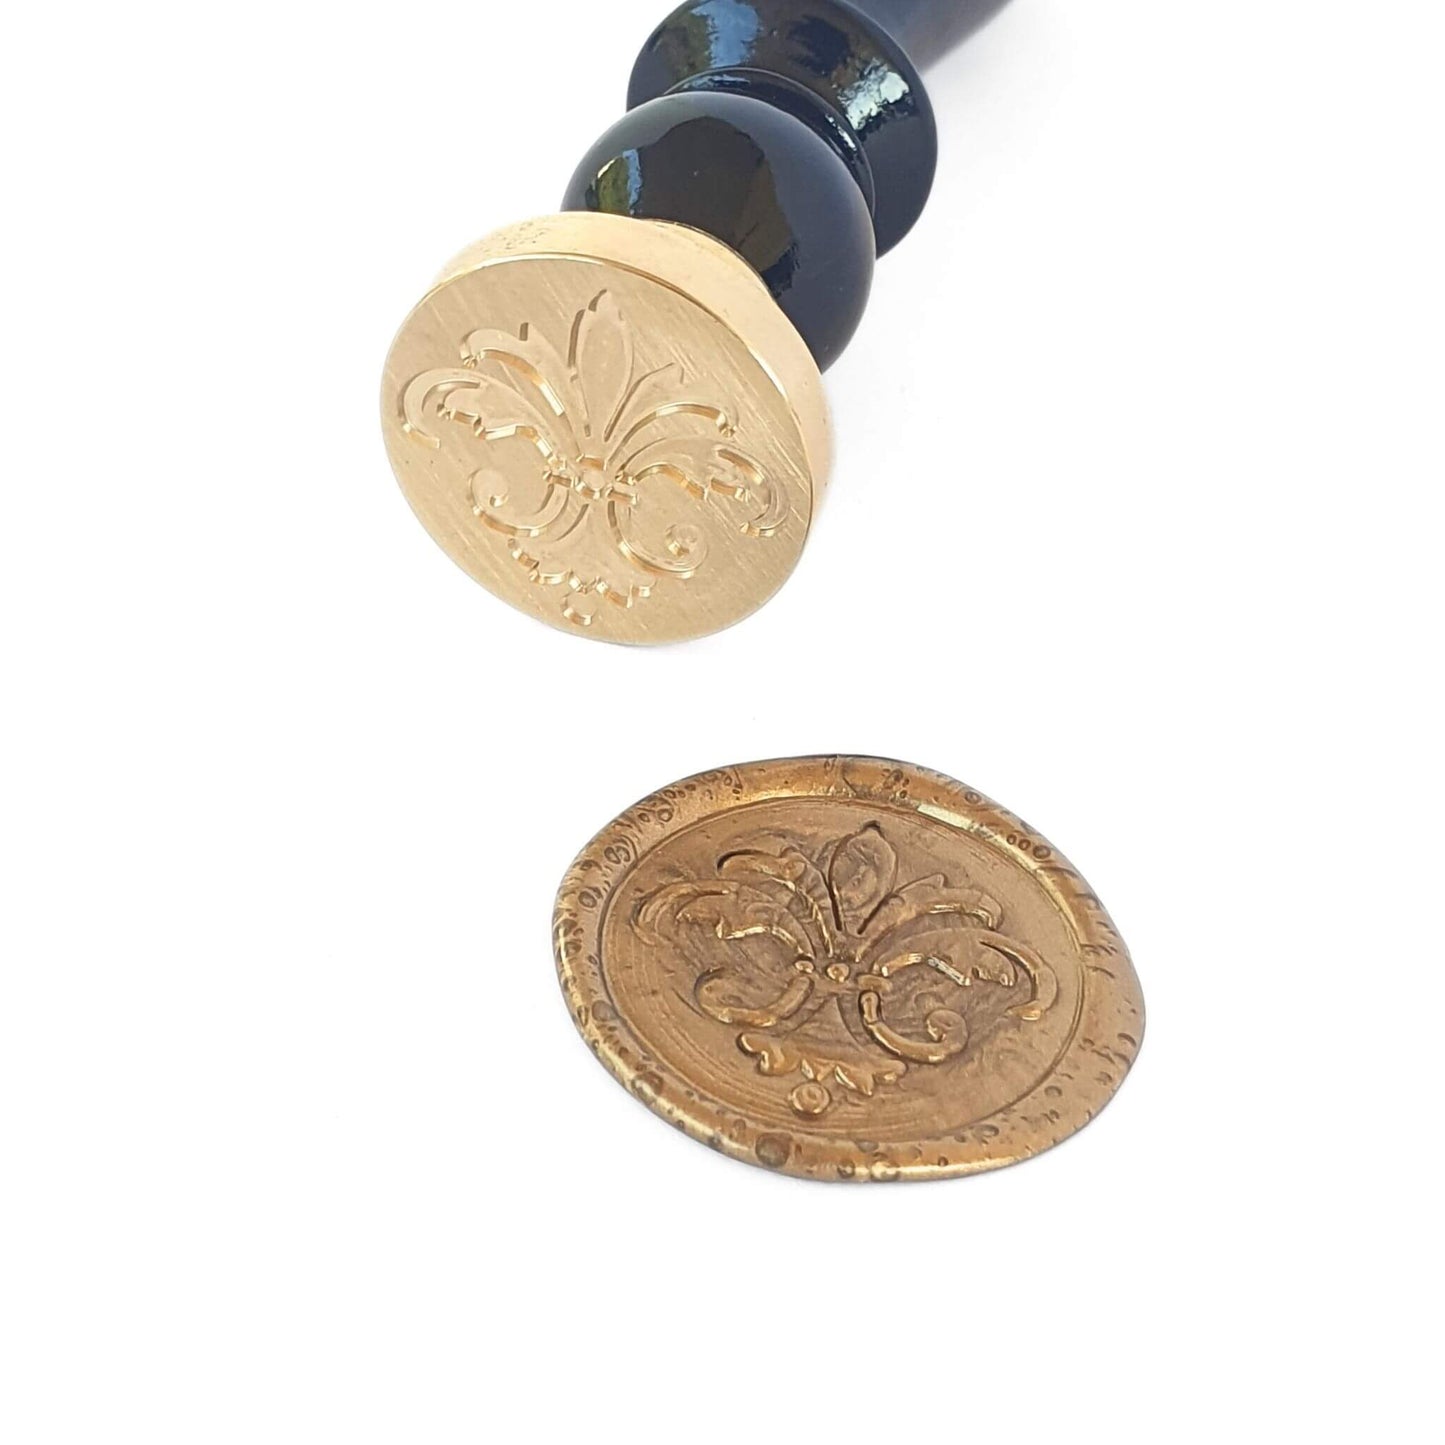 Florentine fleur de lis symbol engraved on brass wax seal with black wood handle next to antique gold wax seal